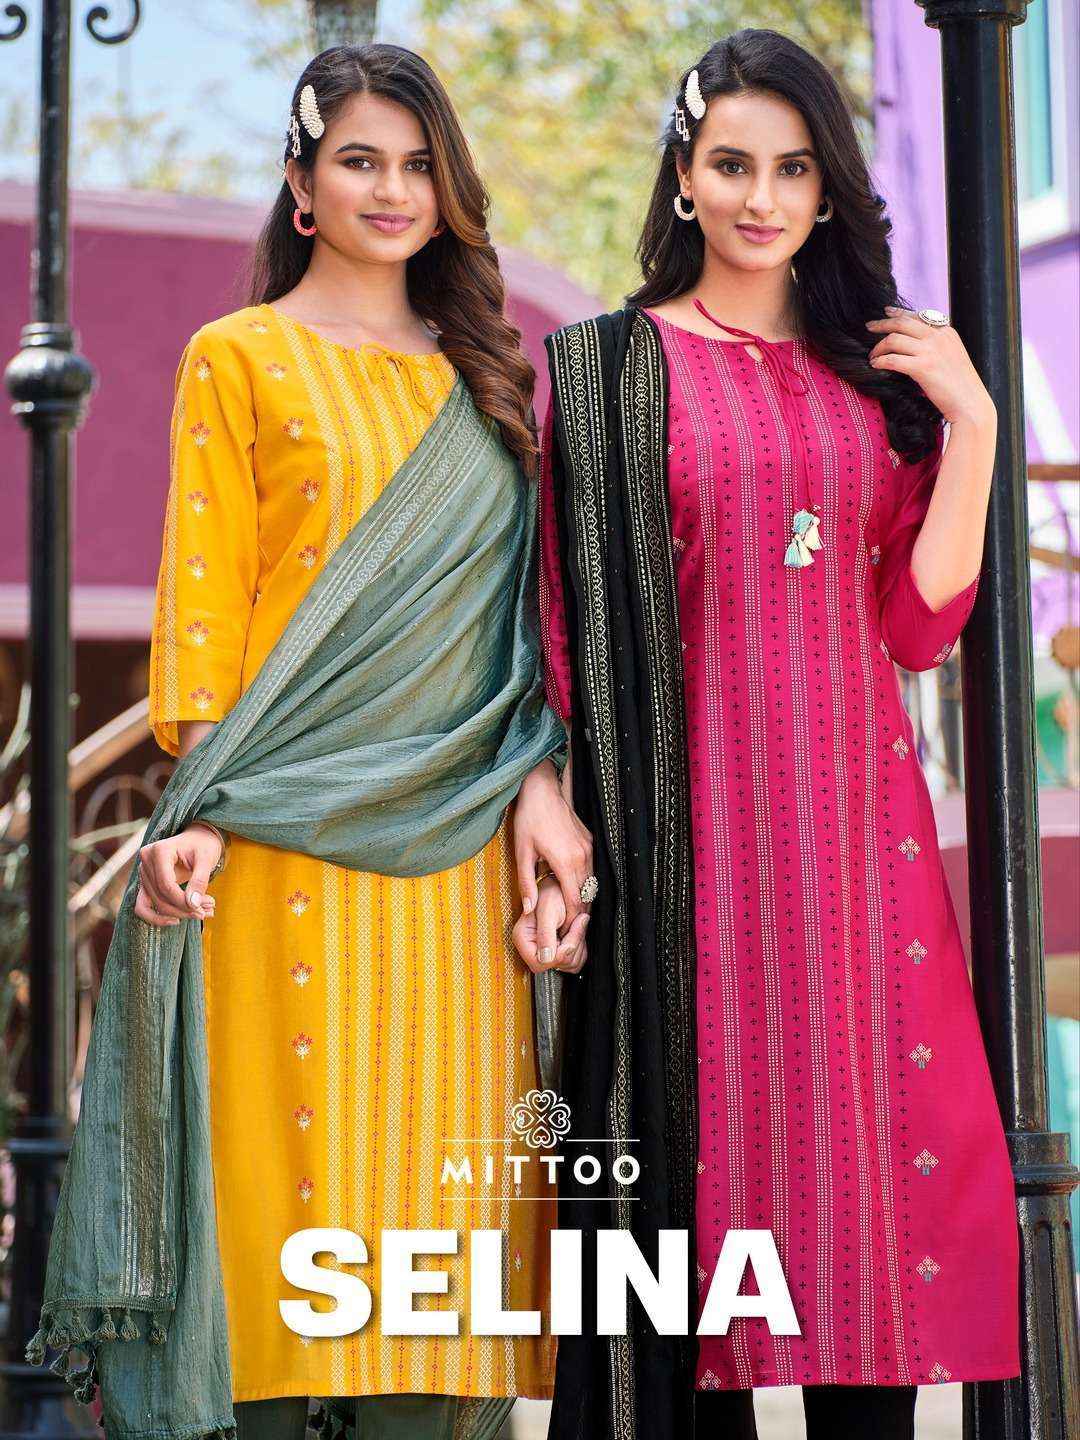 MITTOO FASHION SELINA READYMADE SUITS WHOLESALE PRICE